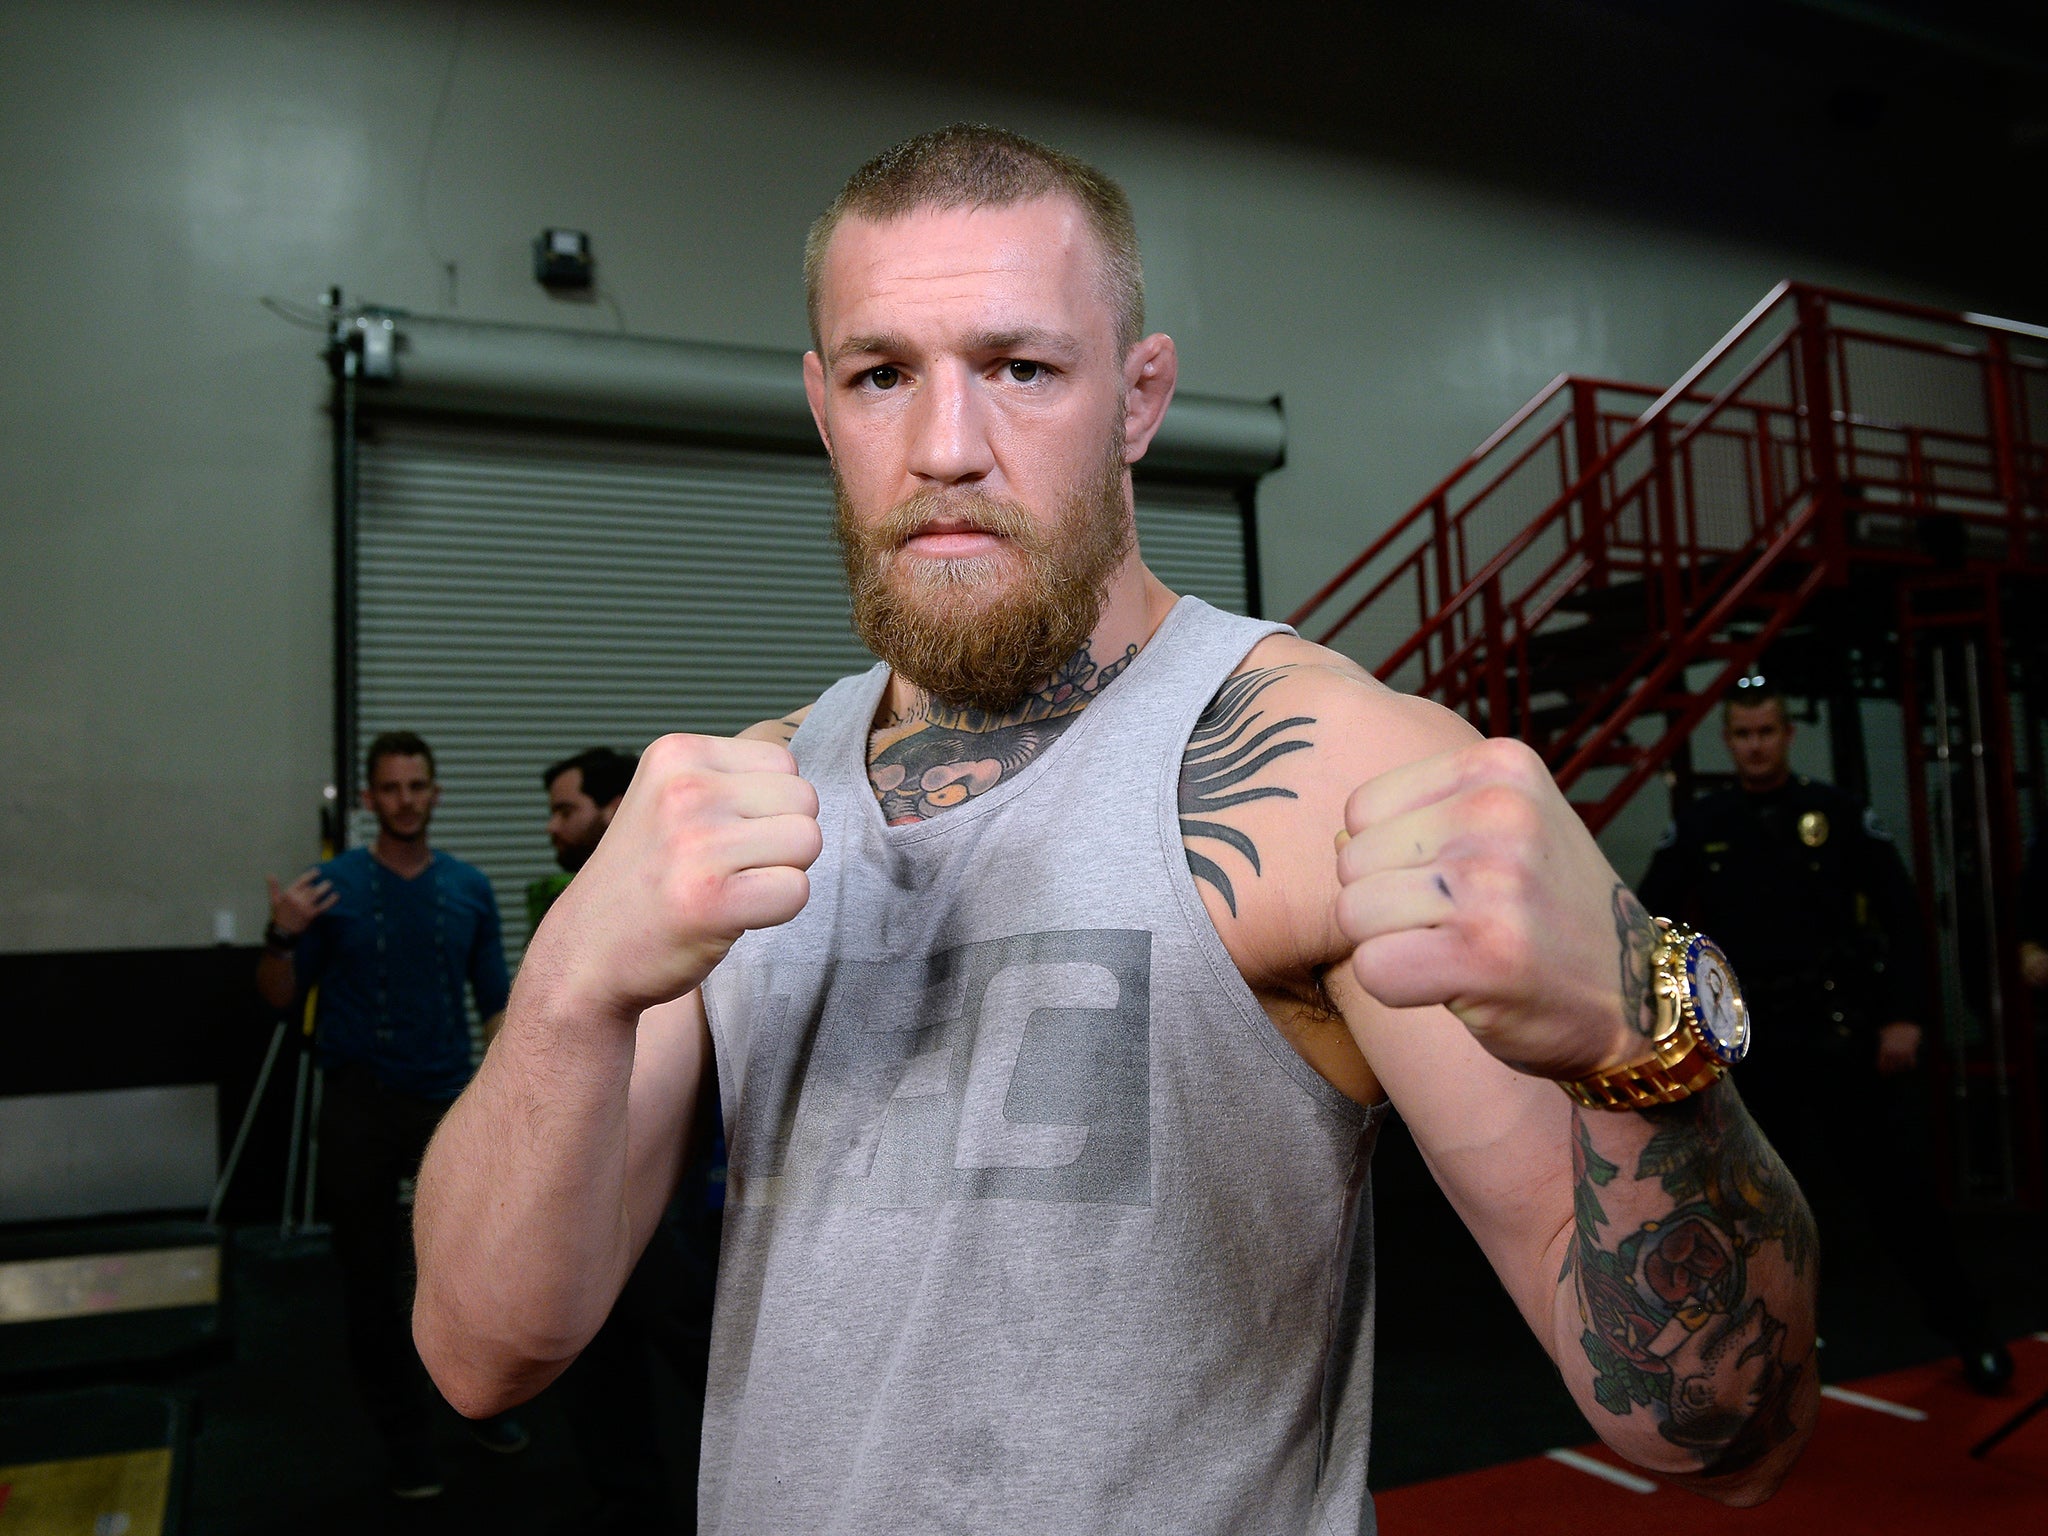 &#13;
Conor McGregor has stepped up two wieght divisions since his last fight&#13;